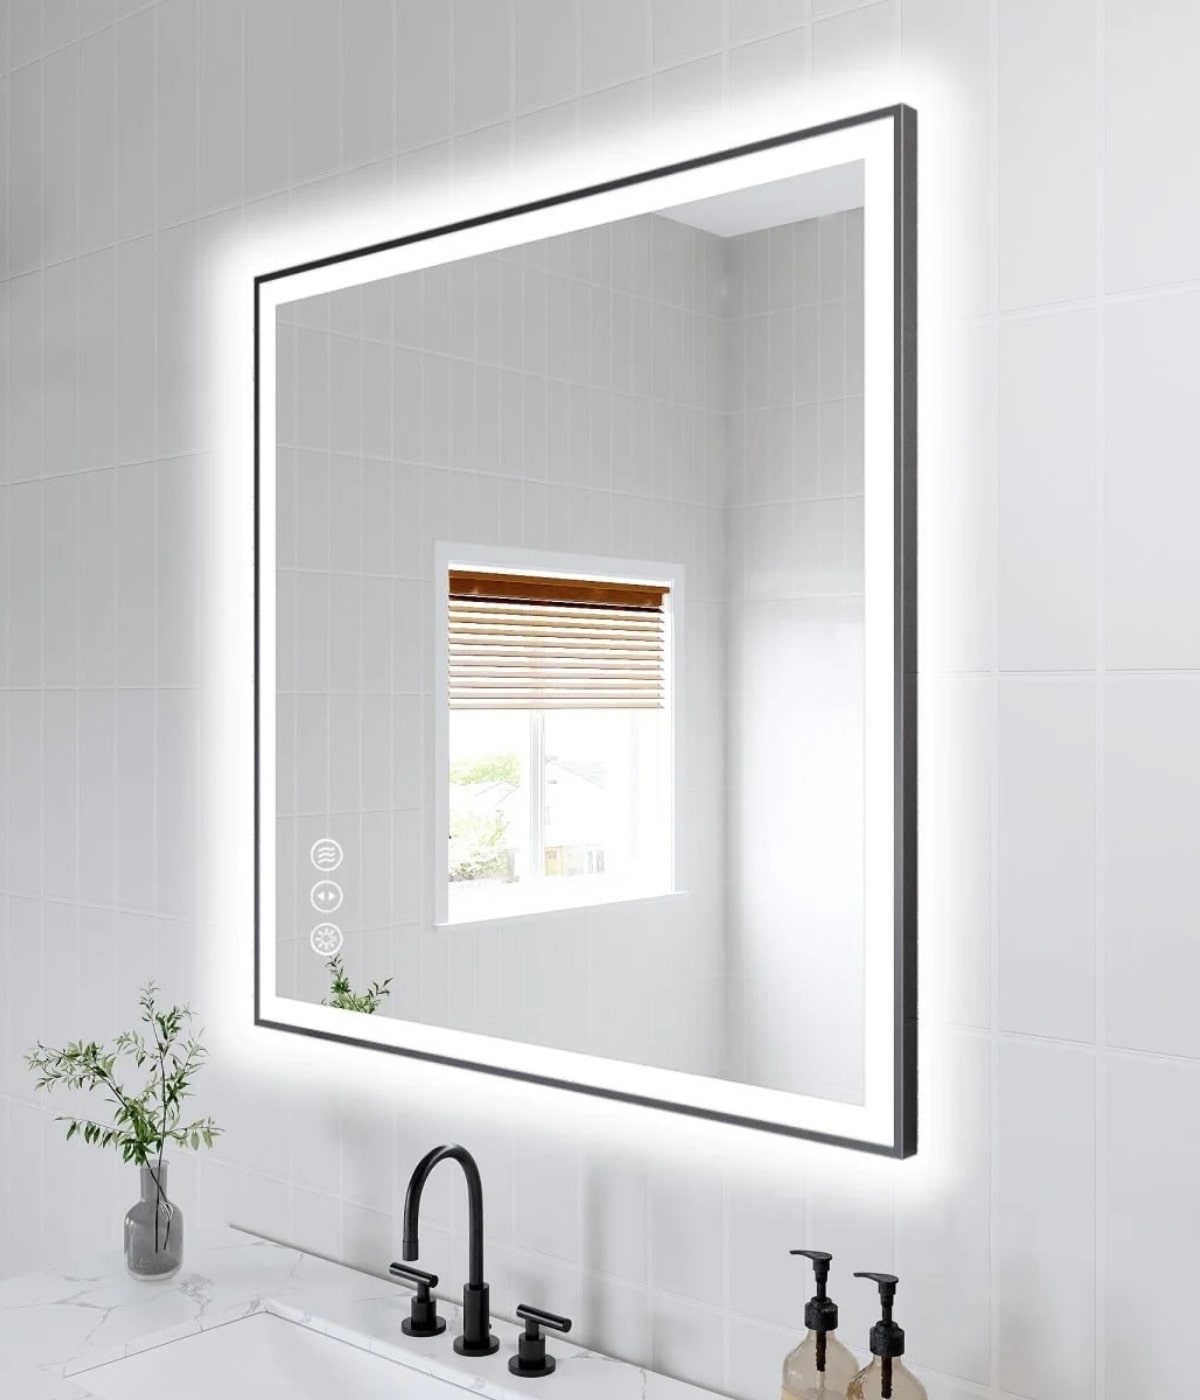 You wouldn't have a real bathroom without an LED mirror for your Modern Bathroom vanity